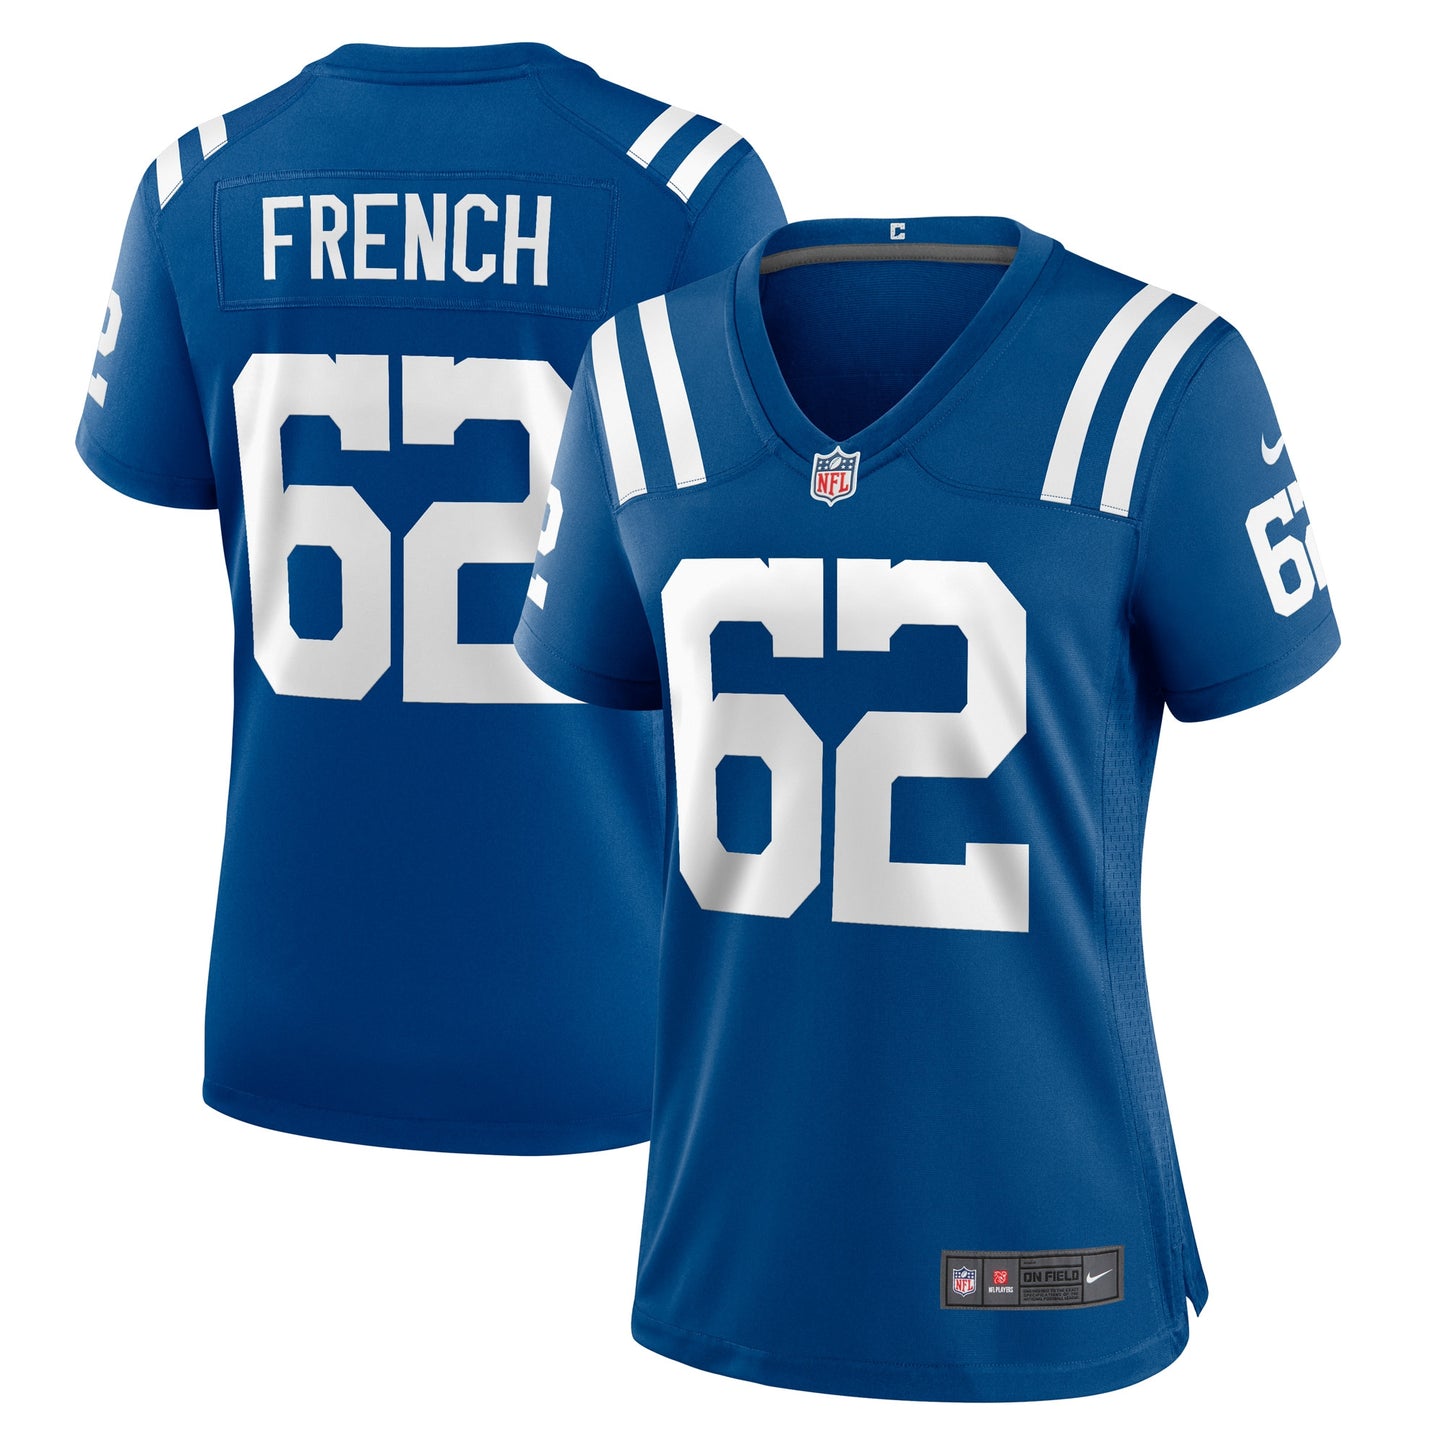 Wesley French Indianapolis Colts Nike Women's Game Player Jersey - Royal